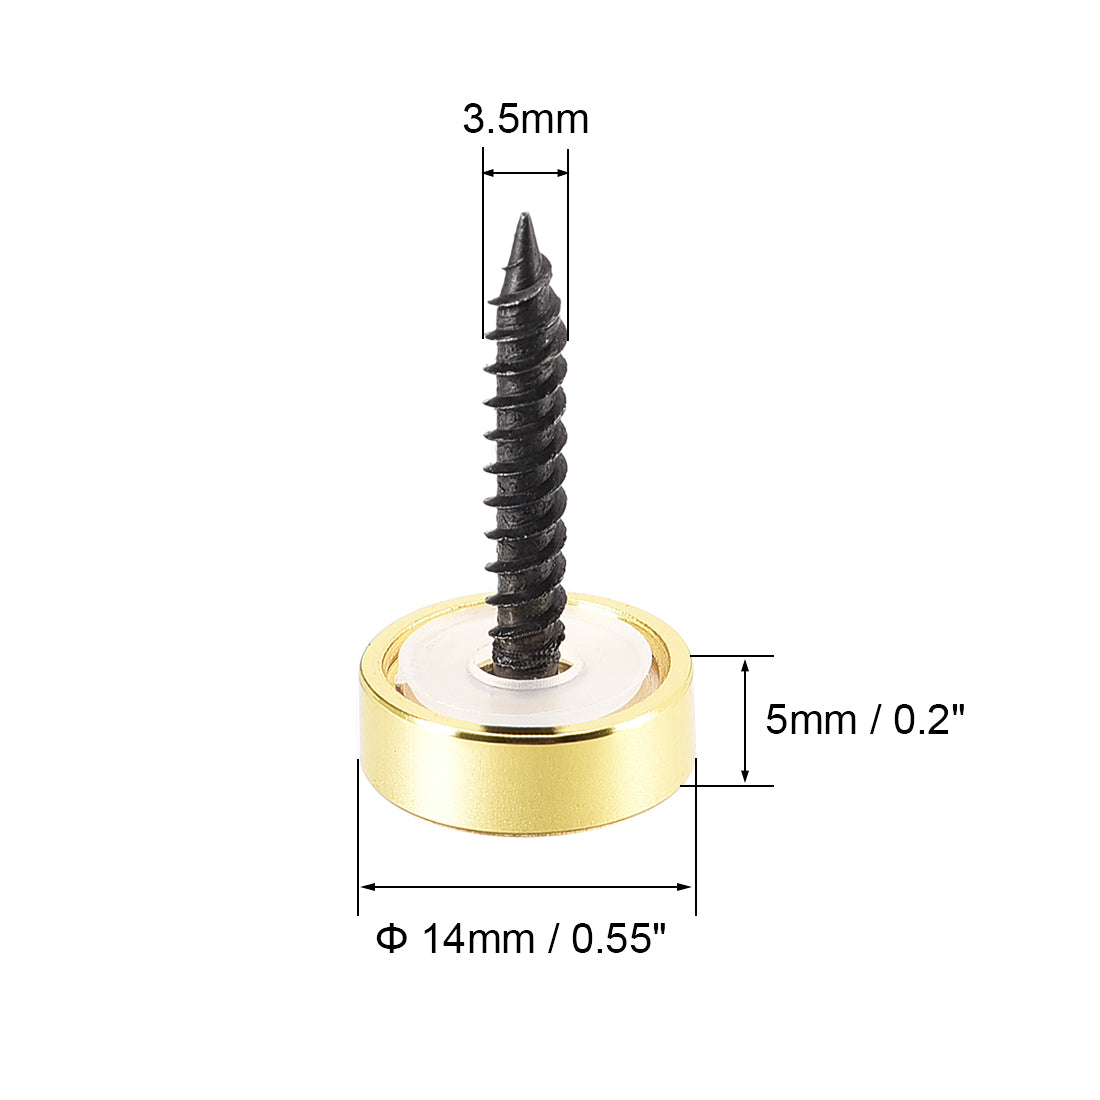 uxcell Uxcell Mirror Screws, Decorative Cap Fasteners Cover Nails, Electroplated, Bright Golden 14mm/0.55" Brass 4pcs